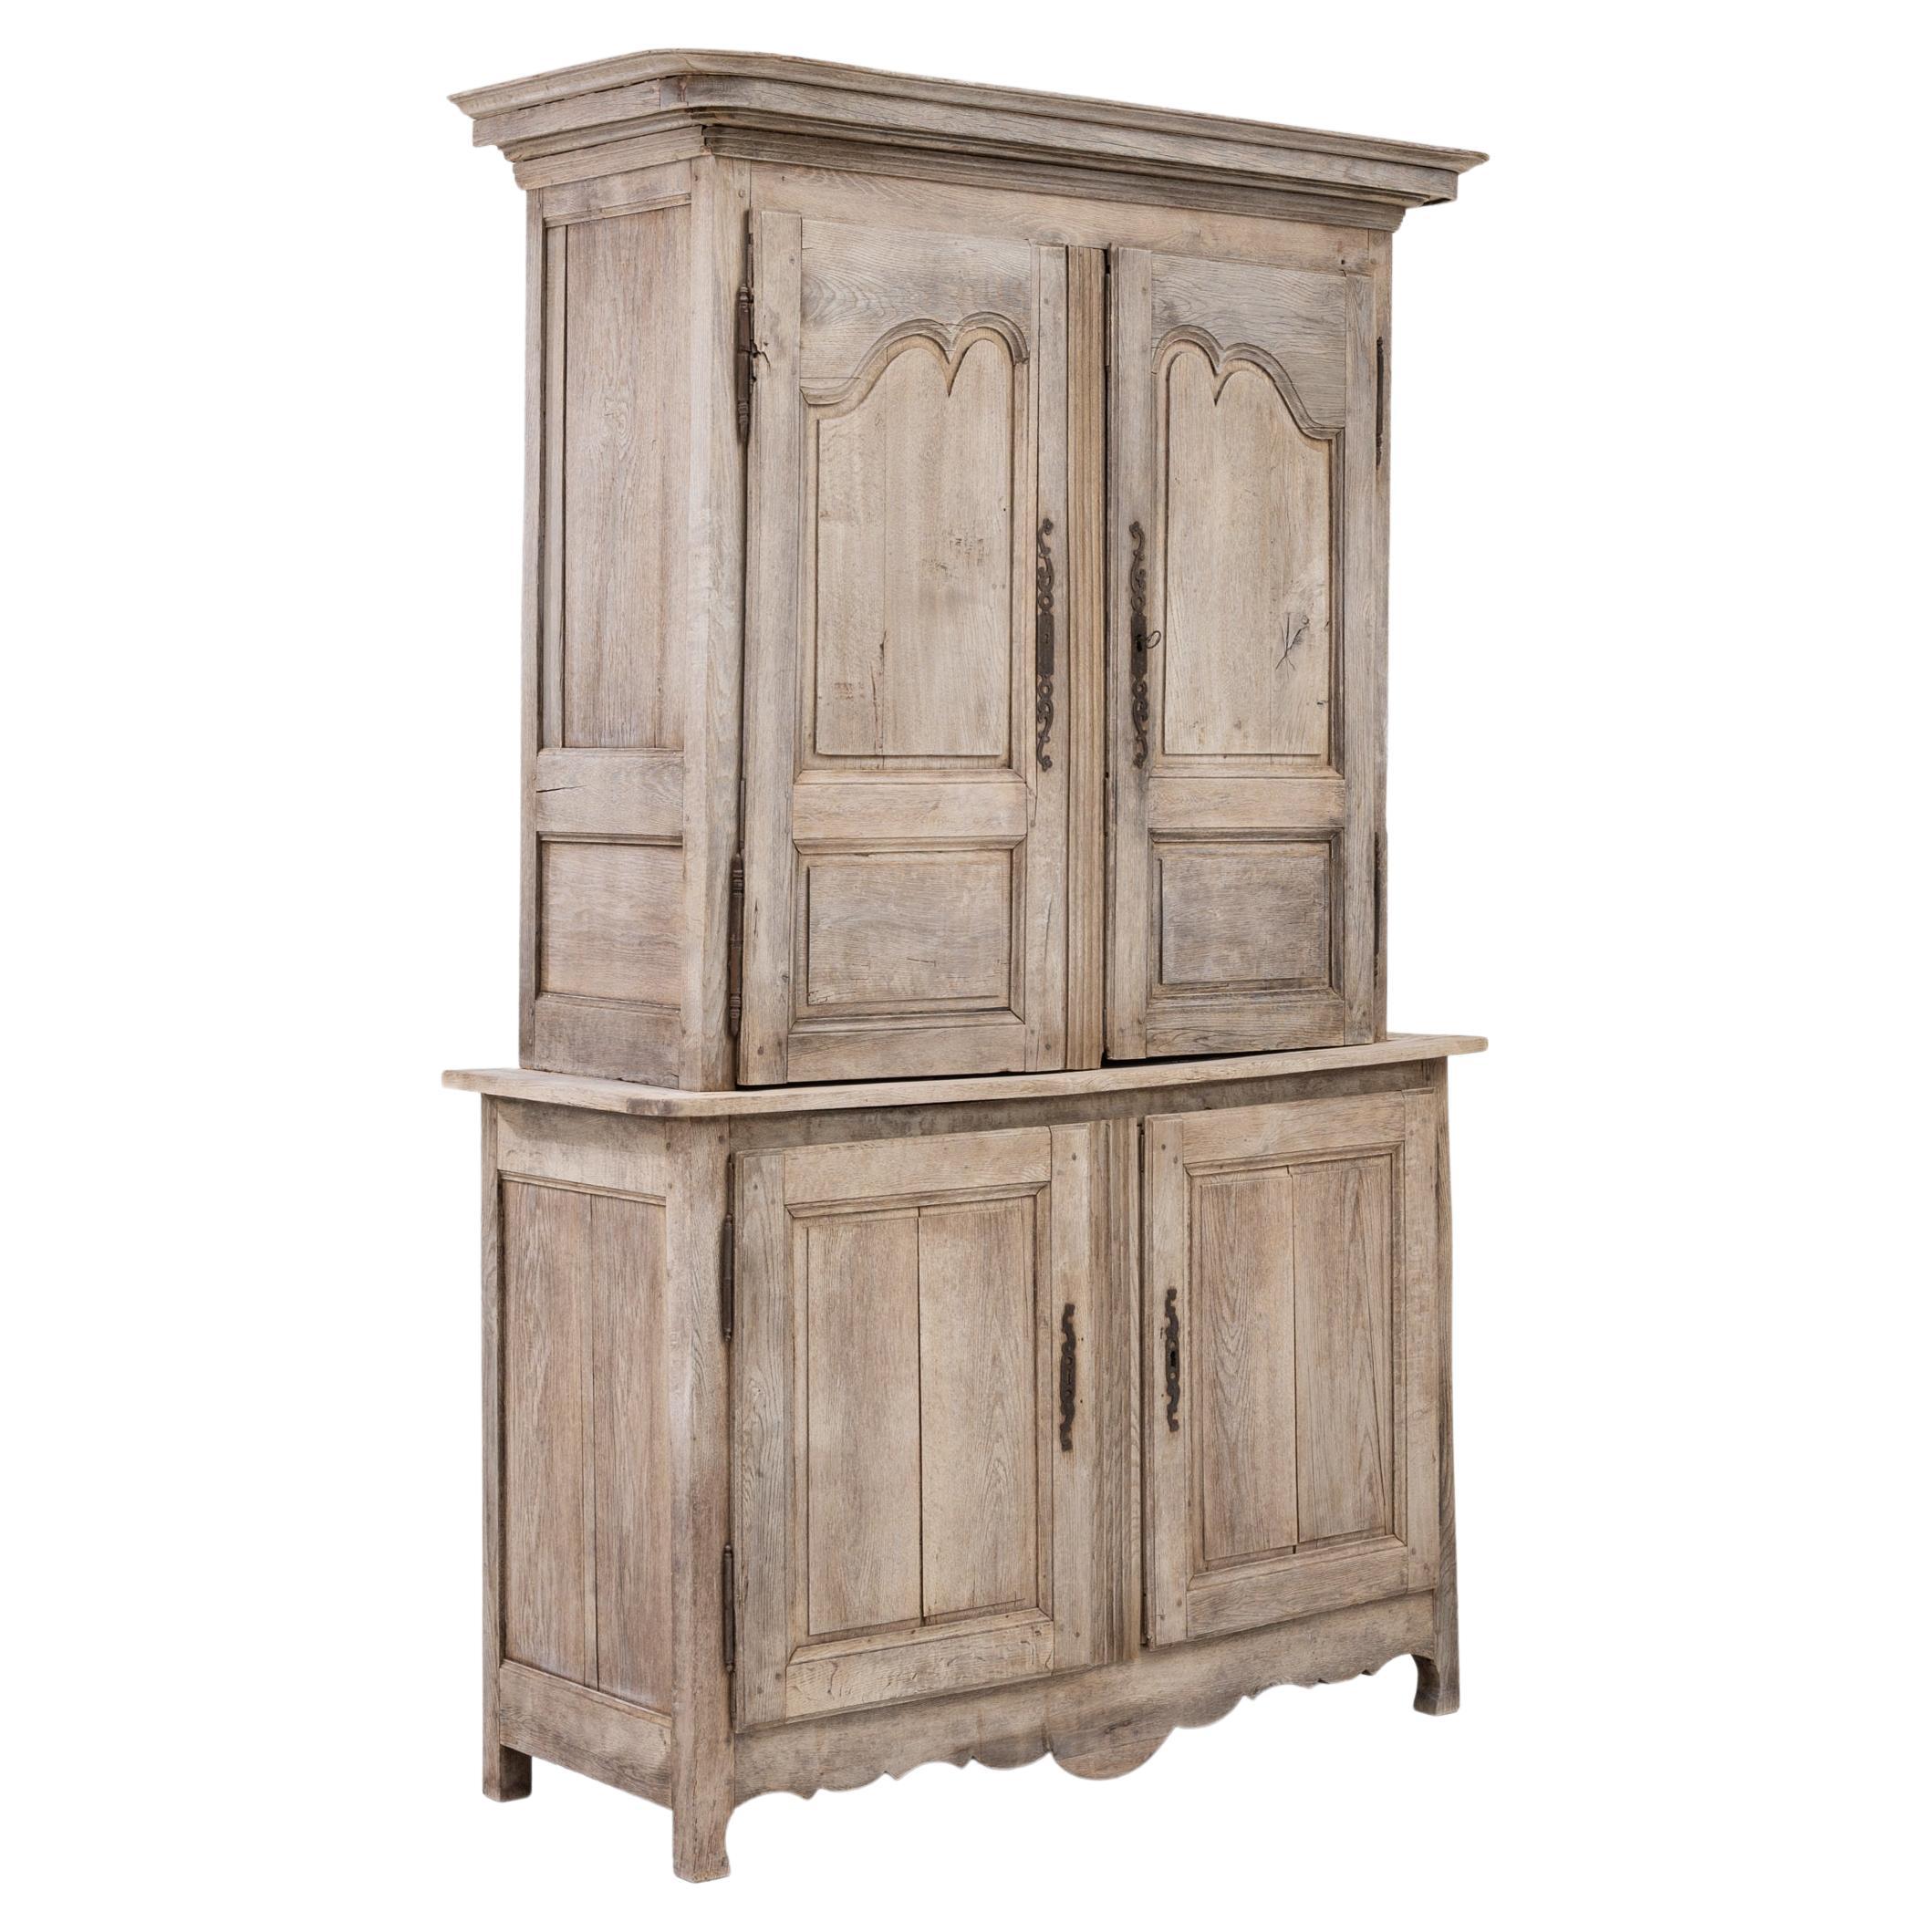 Early 19th Century French Provincial Oak Cabinet